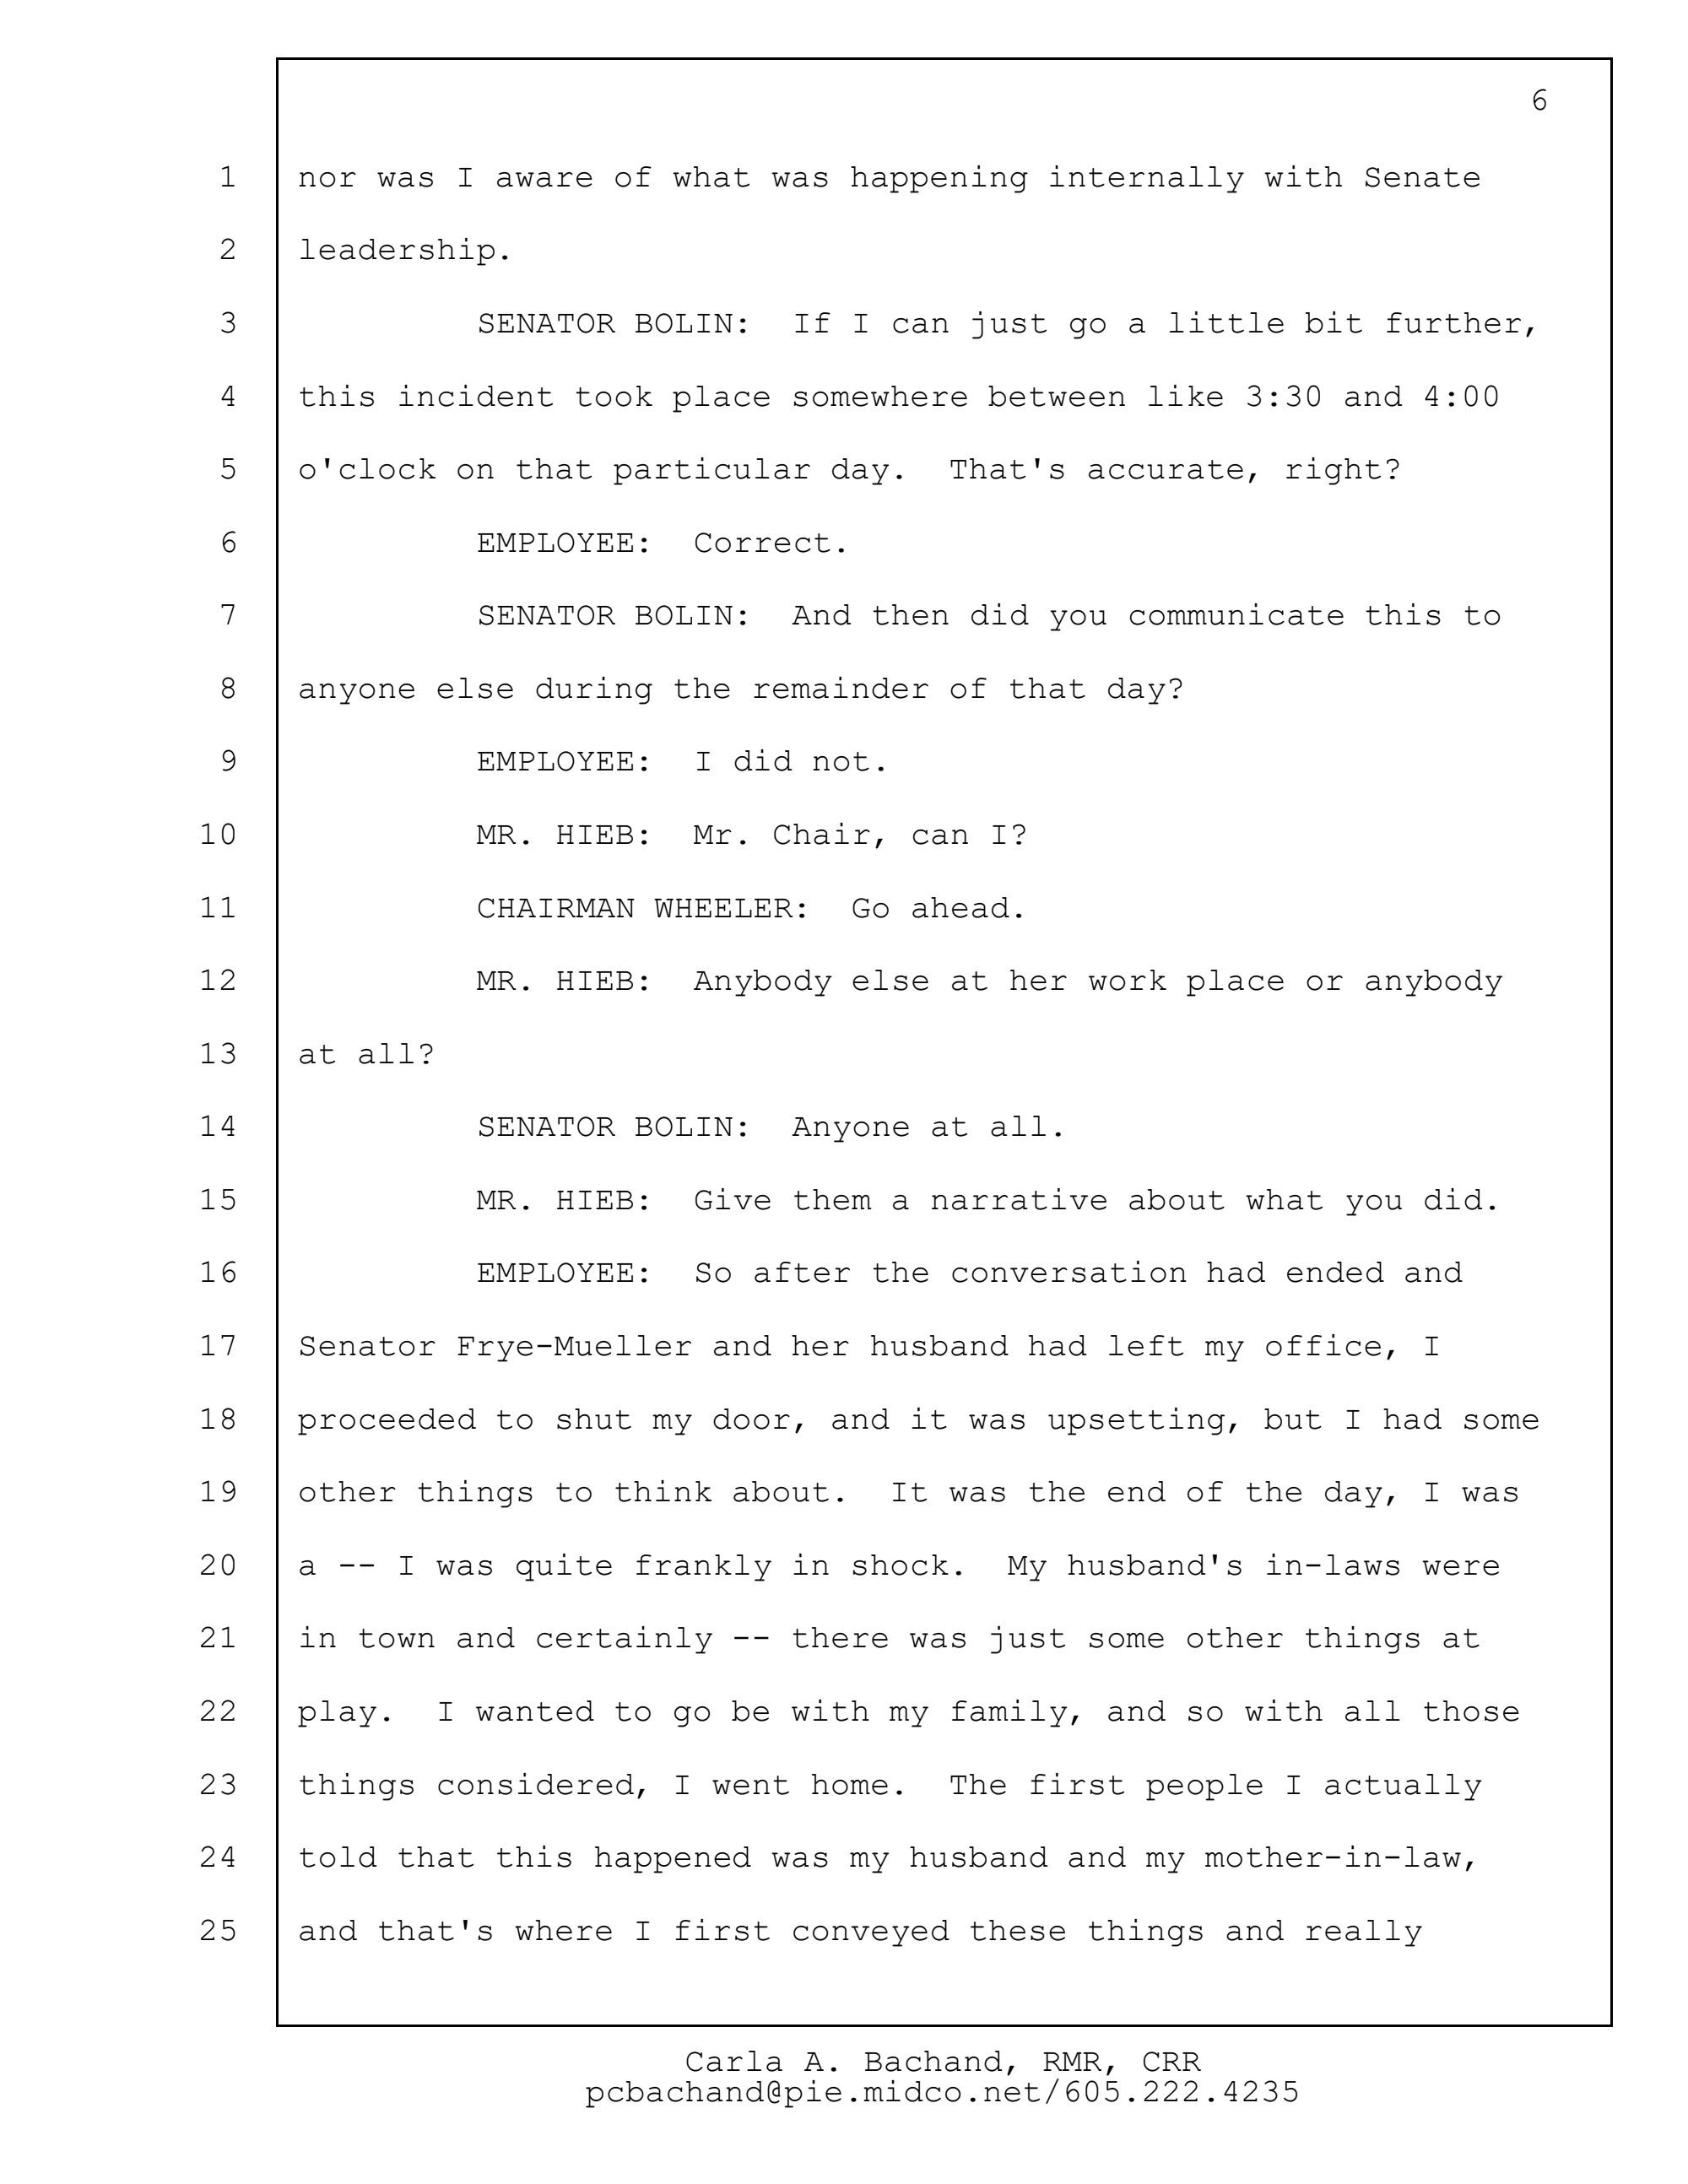 Page 6 of redacted testimony